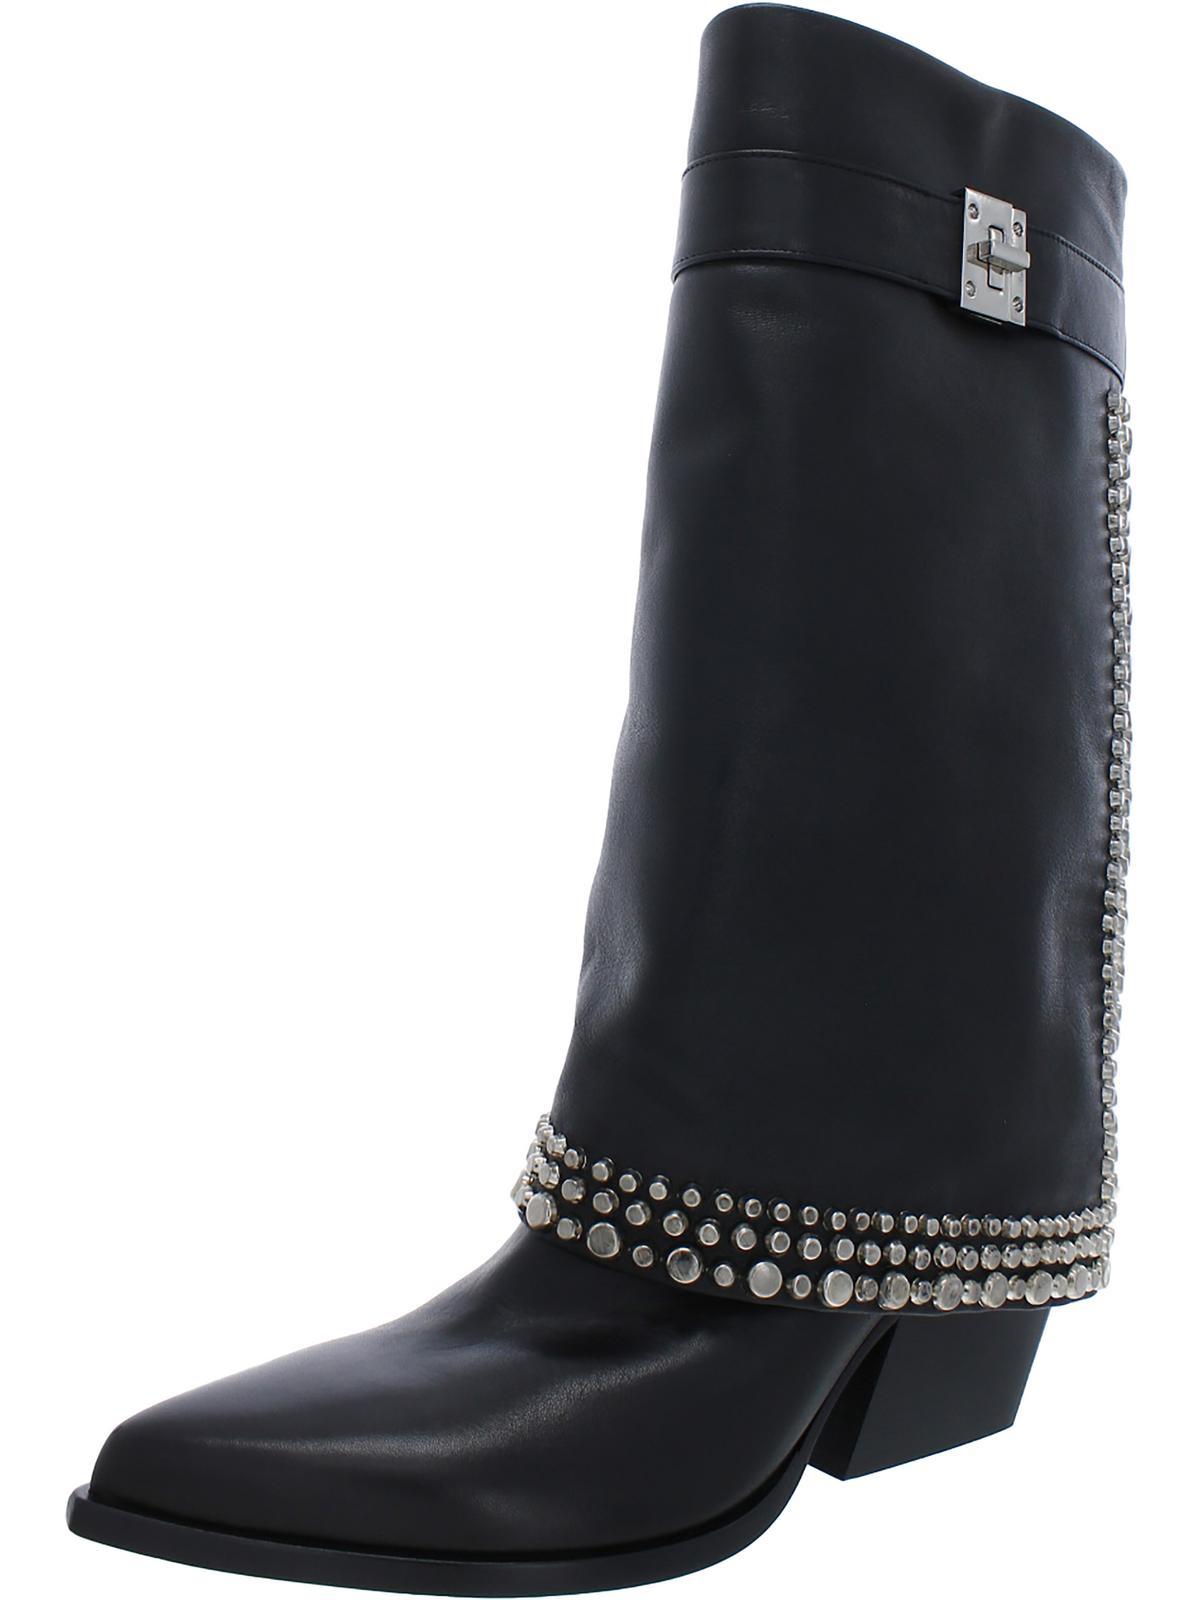 Vince Camuto Katiyah St Leather Mid-calf Boots in Black | Lyst